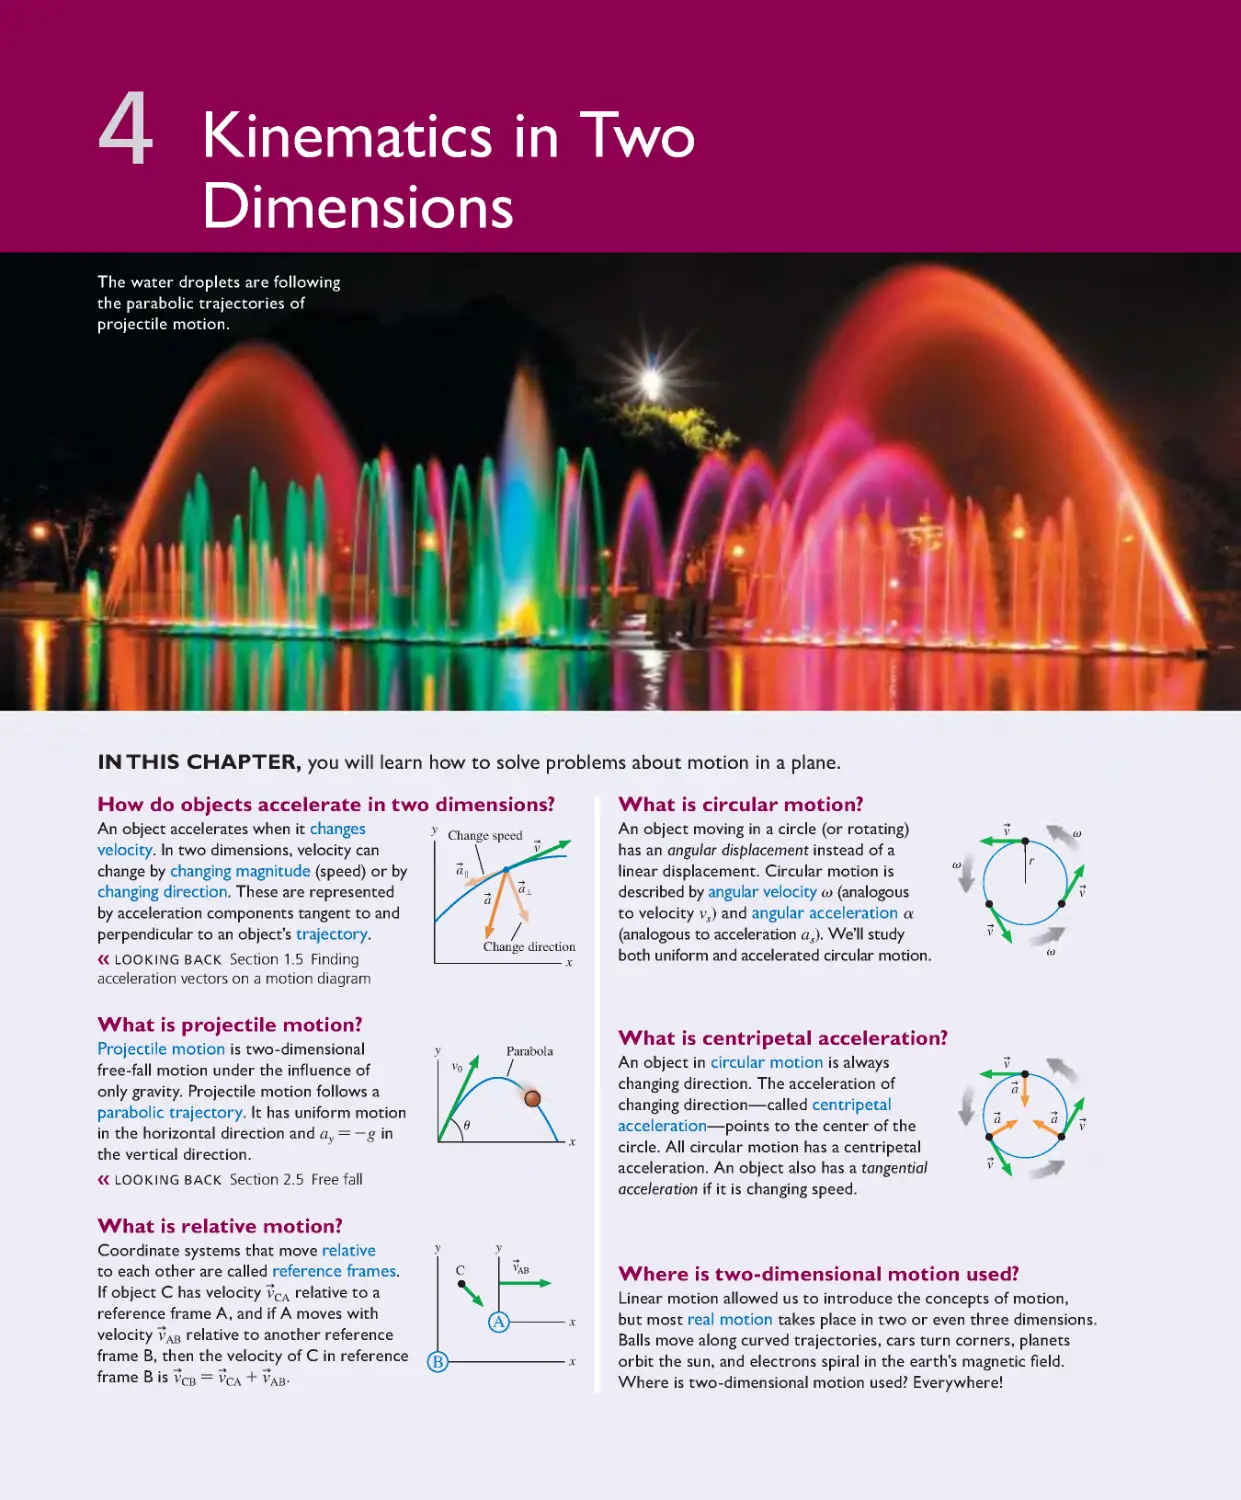 Chapter 4: Kinematics in Two Dimensions